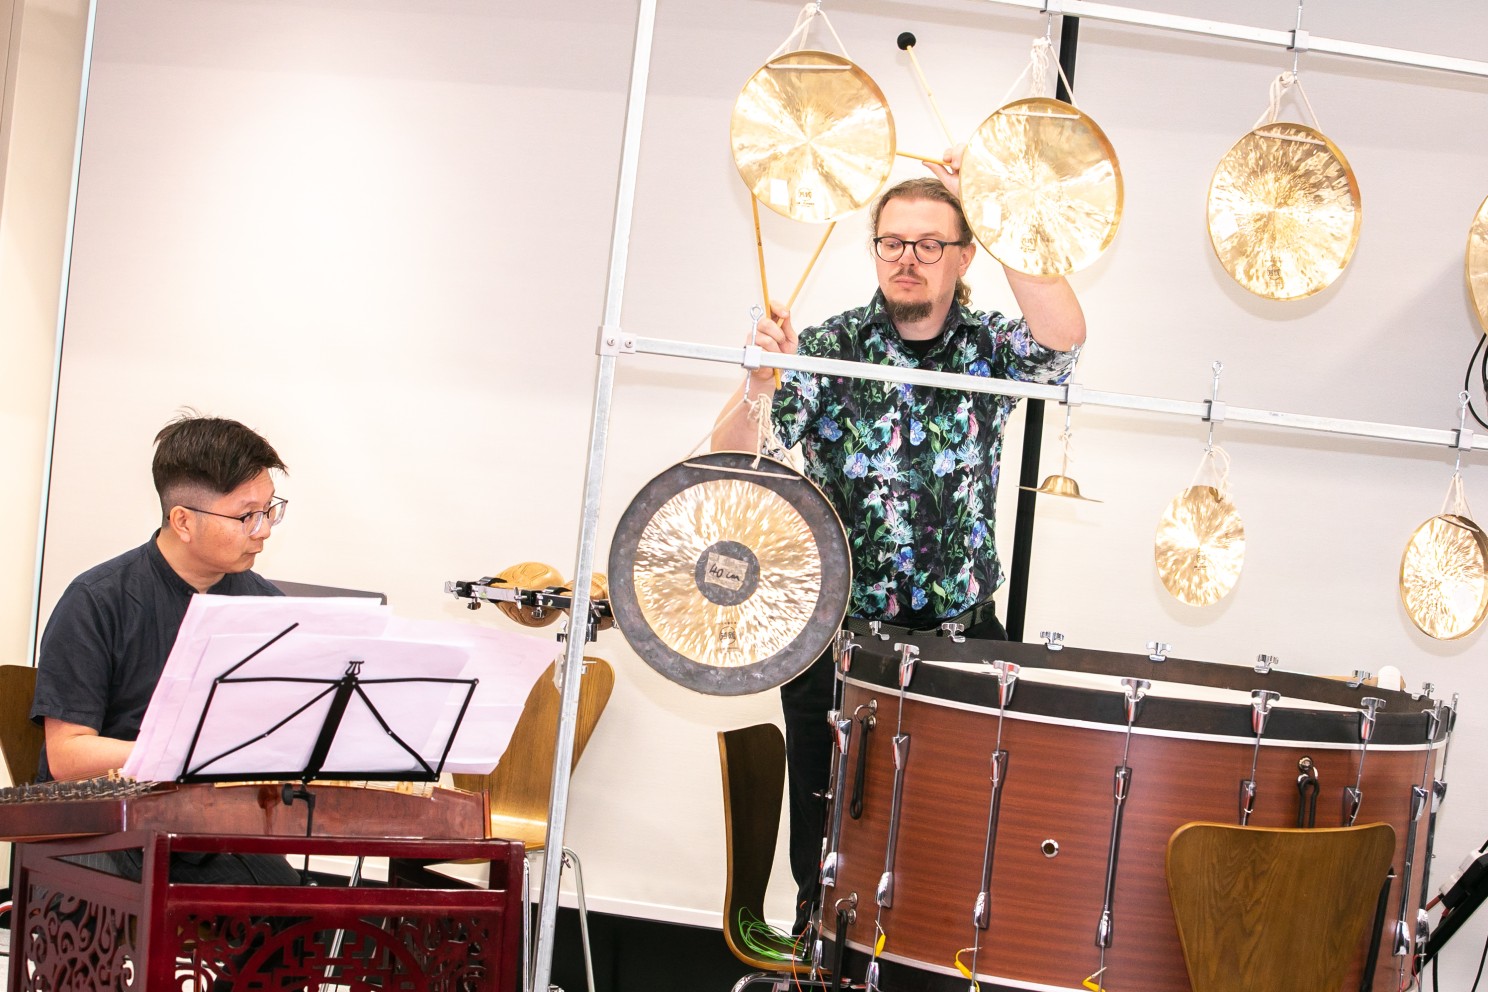 Prof Ip Kim-ho (left), Professor Practice and Head of the Wong Bing Lai Music and Performing Arts Unit and Prof Enrico Bertelli (right), Associate Professor of Practice present an immersive music performance with various musical instruments at the ceremony.